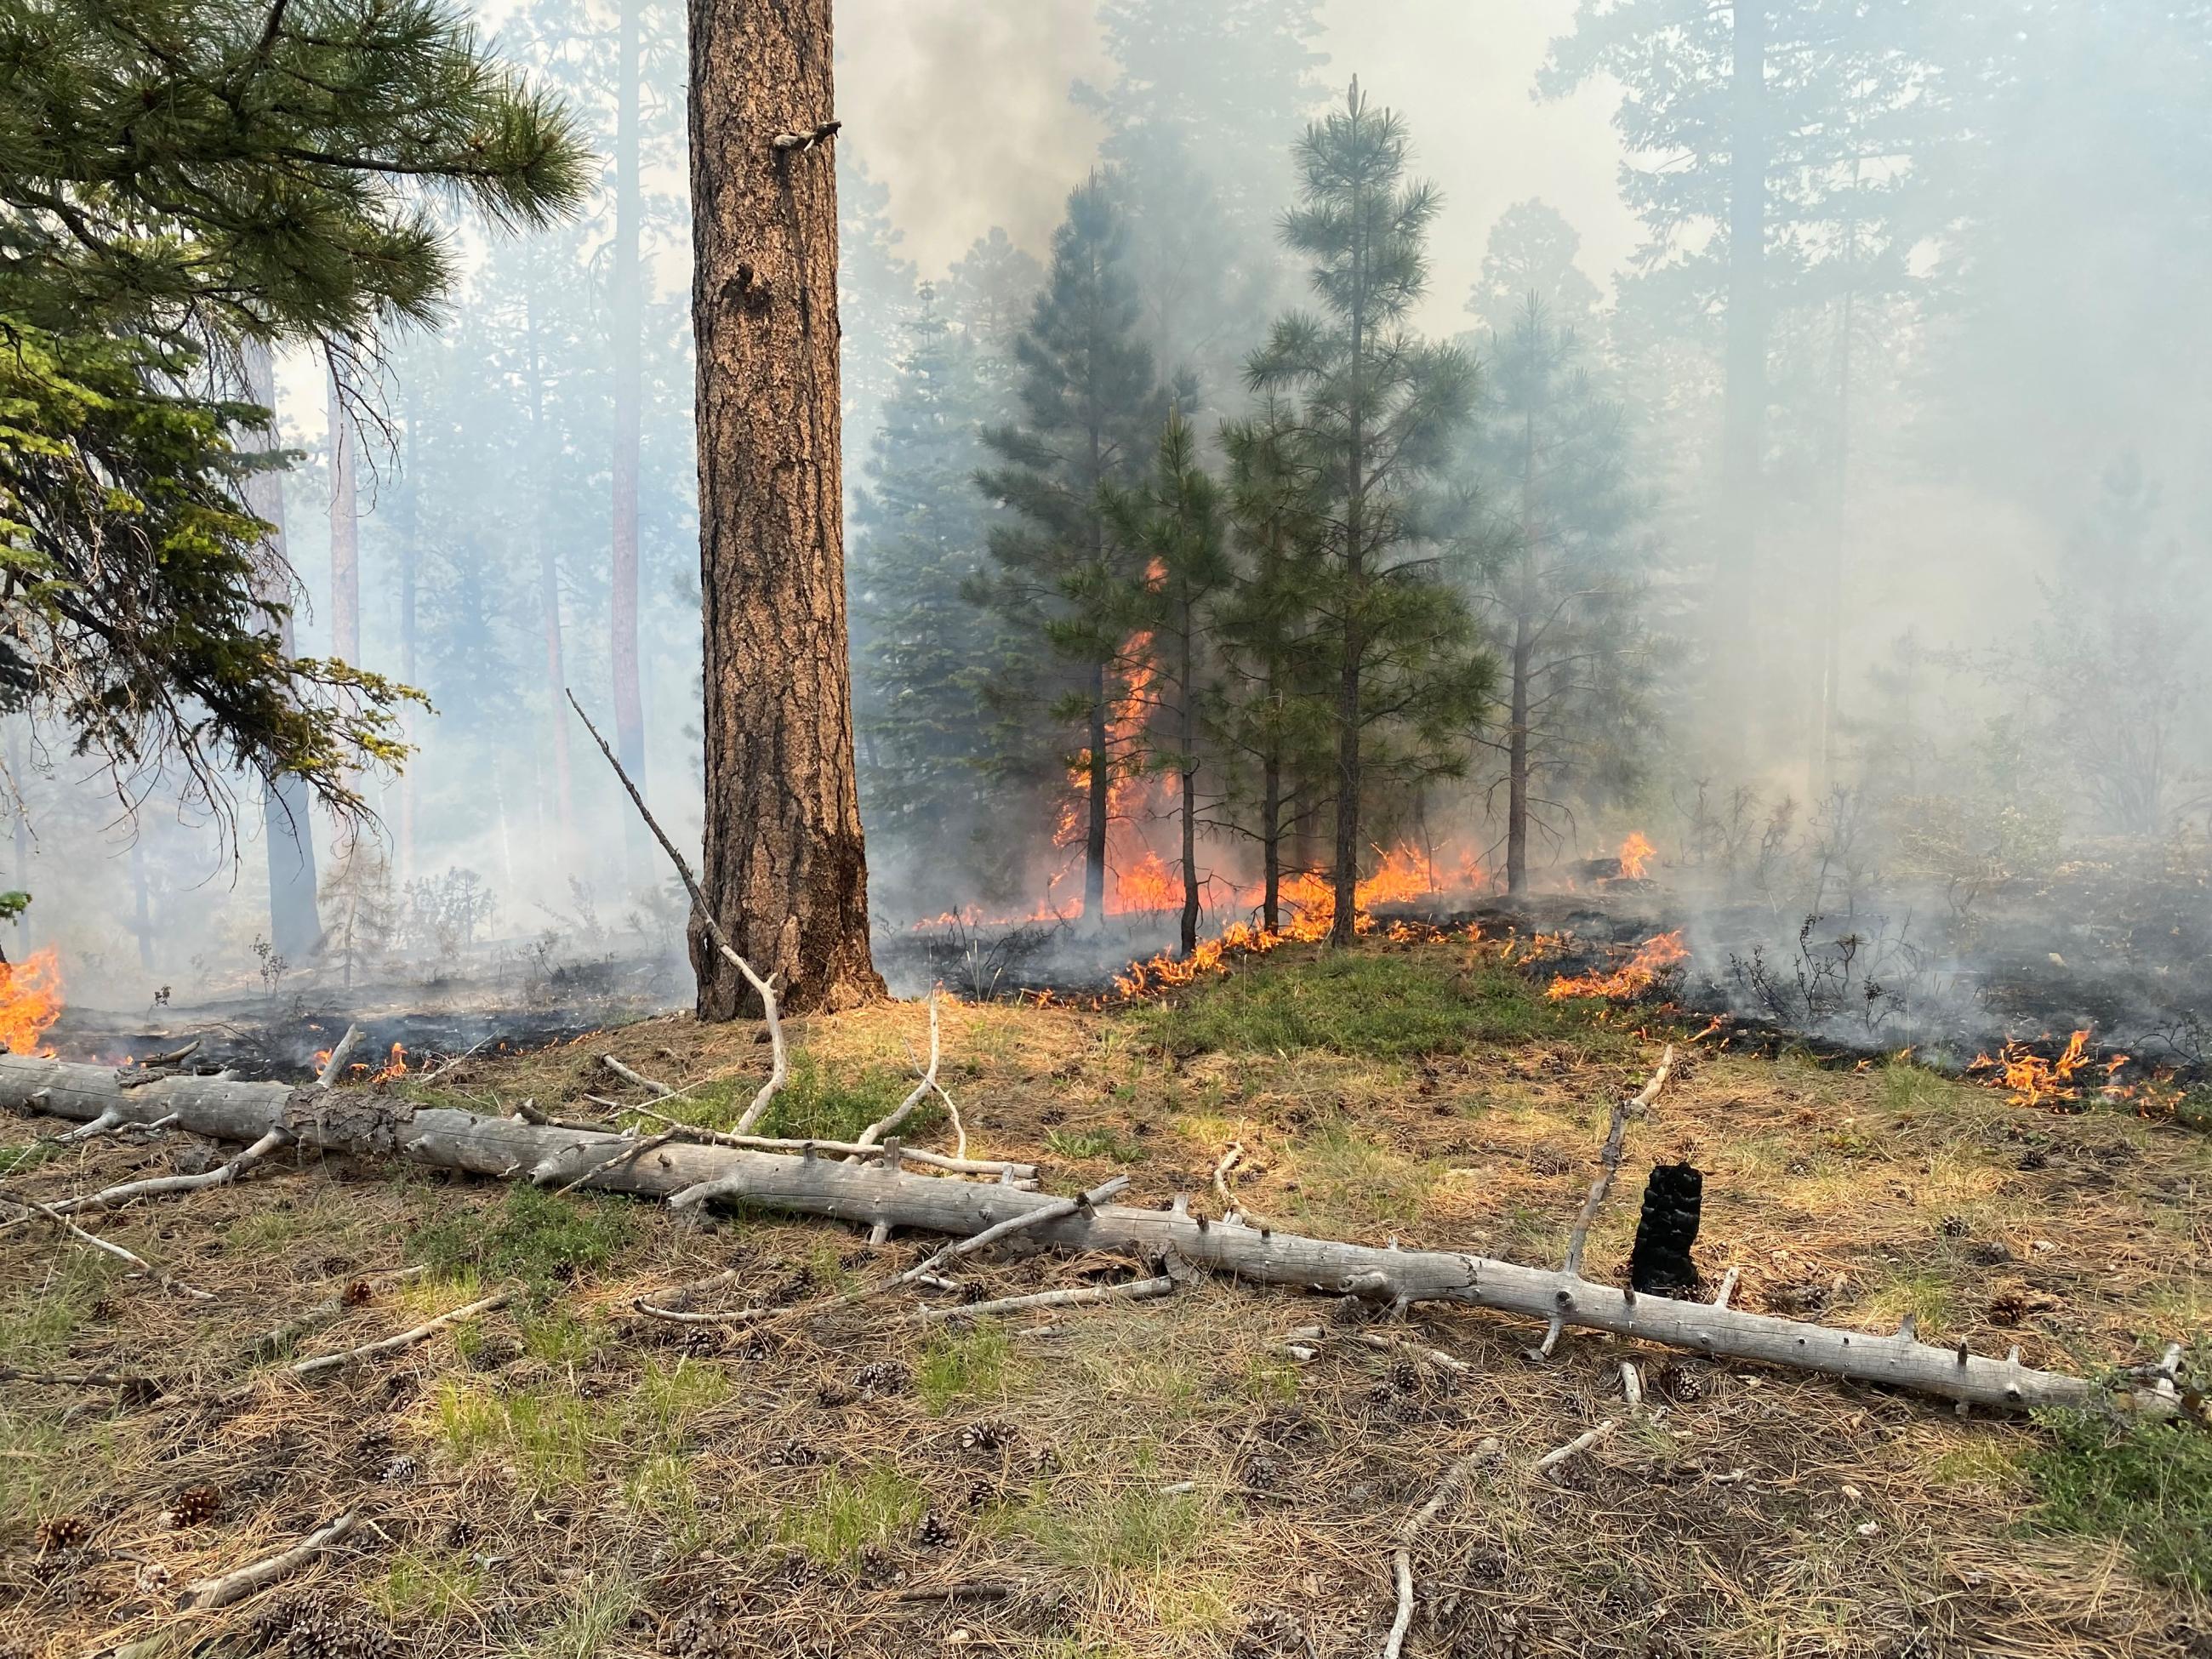 Fire burning in pine needles and small trees and shrubs, the trees in the background partially obscured by smoke.